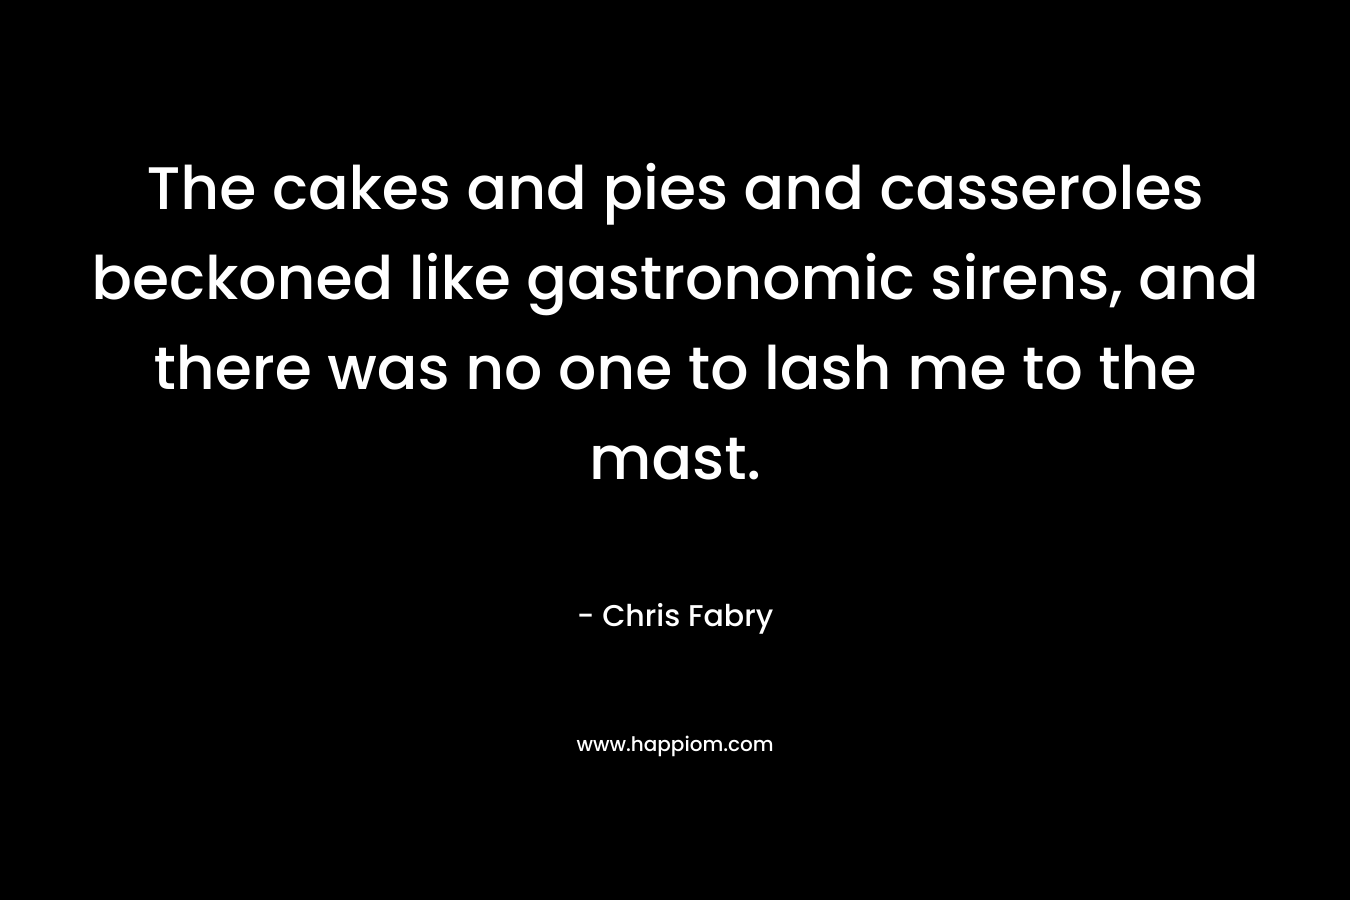 The cakes and pies and casseroles beckoned like gastronomic sirens, and there was no one to lash me to the mast. – Chris Fabry